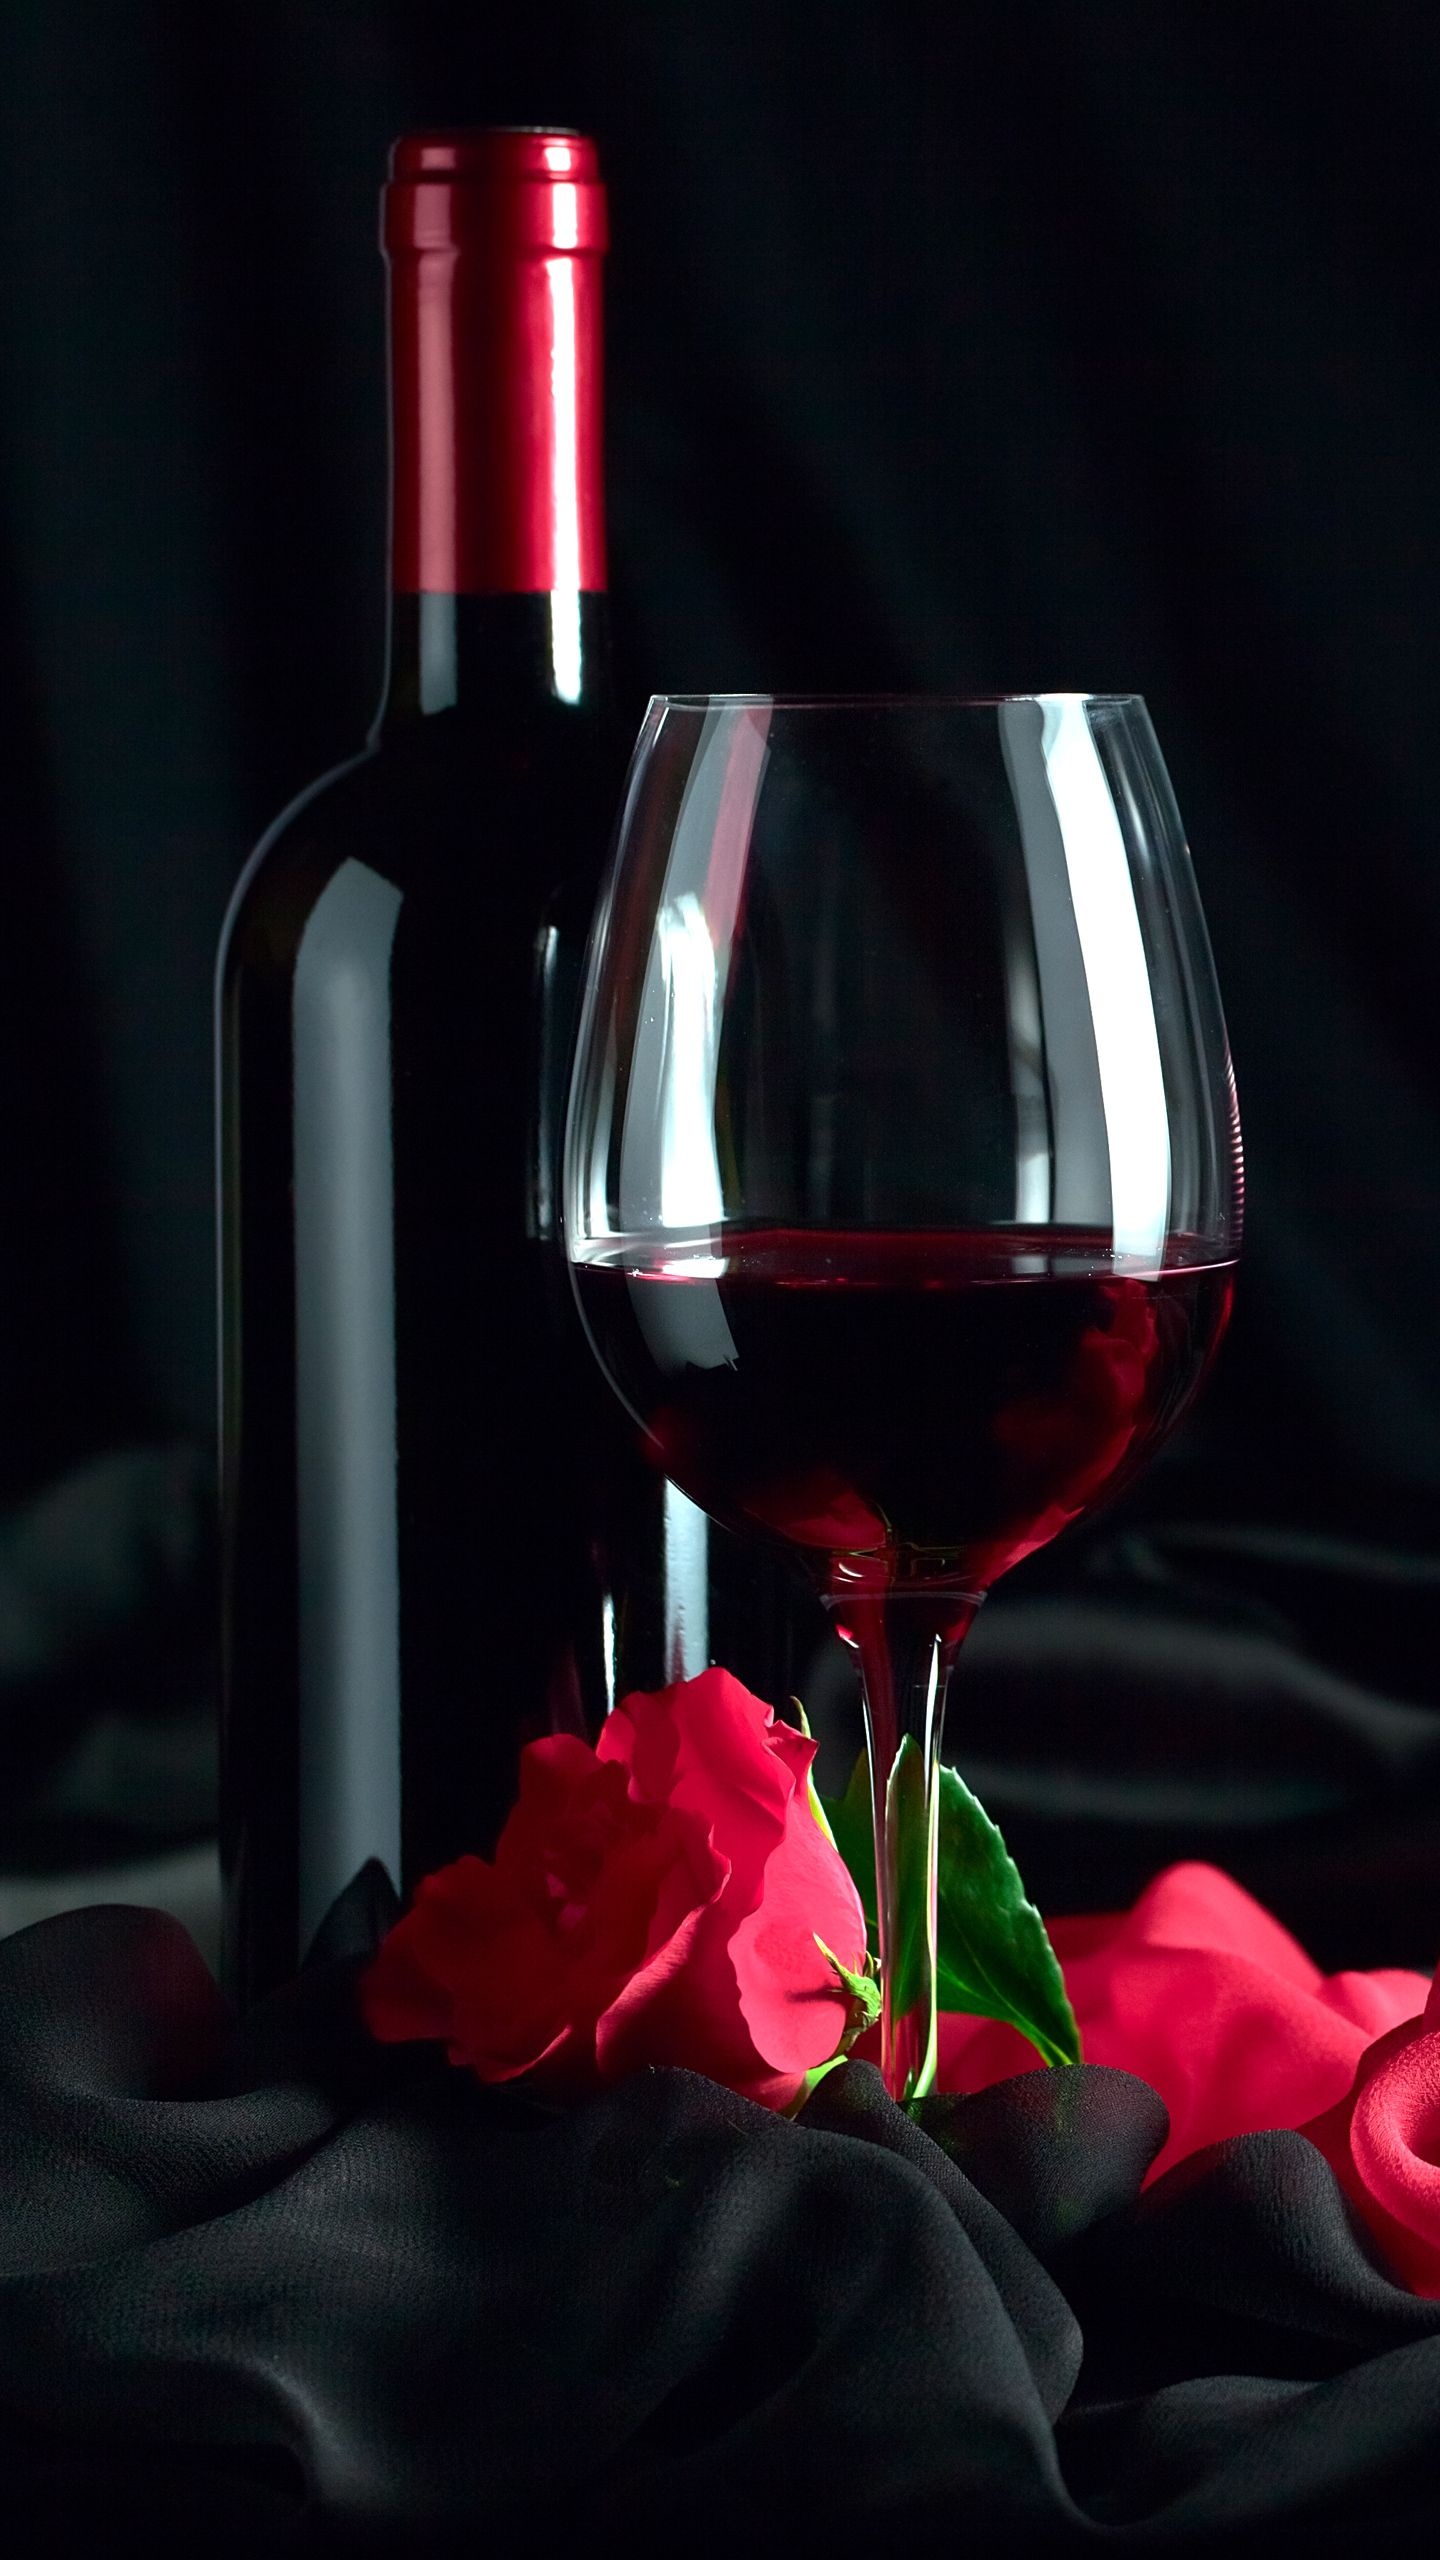 Mobile wallpaper, Wine-themed, On-the-go indulgence, Wine lovers, 1440x2560 HD Phone